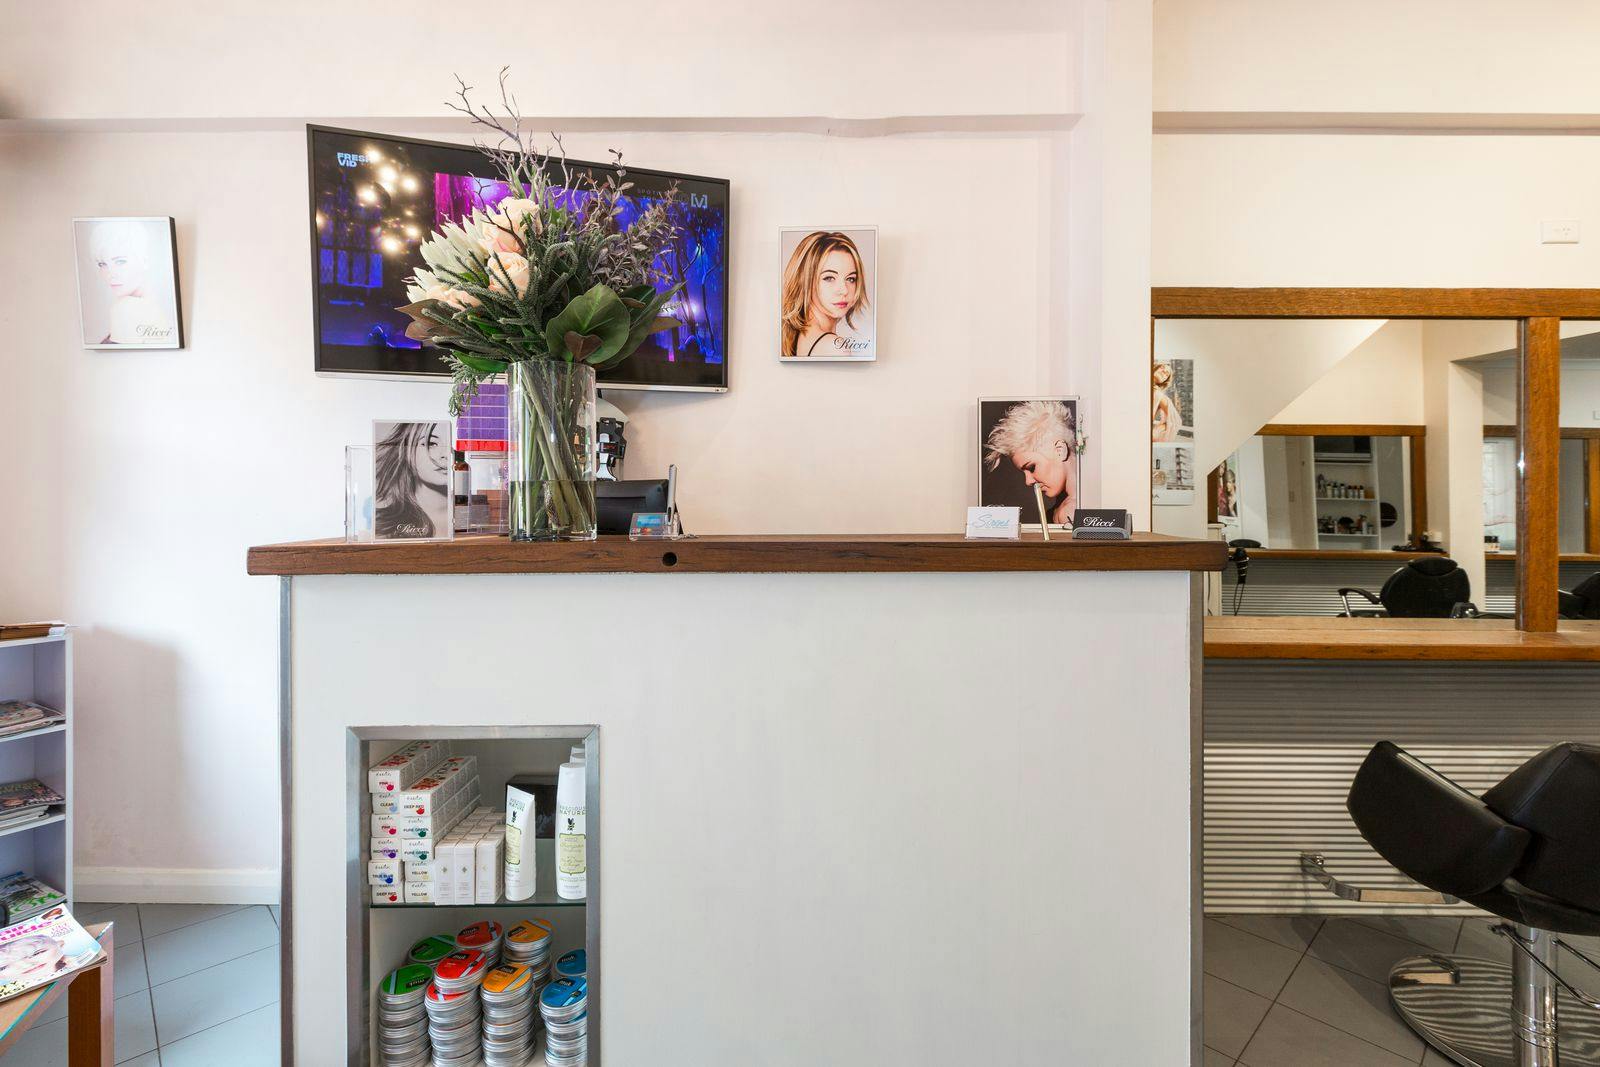 Top 20 Hair Extension Salons in Sydney | Bookwell